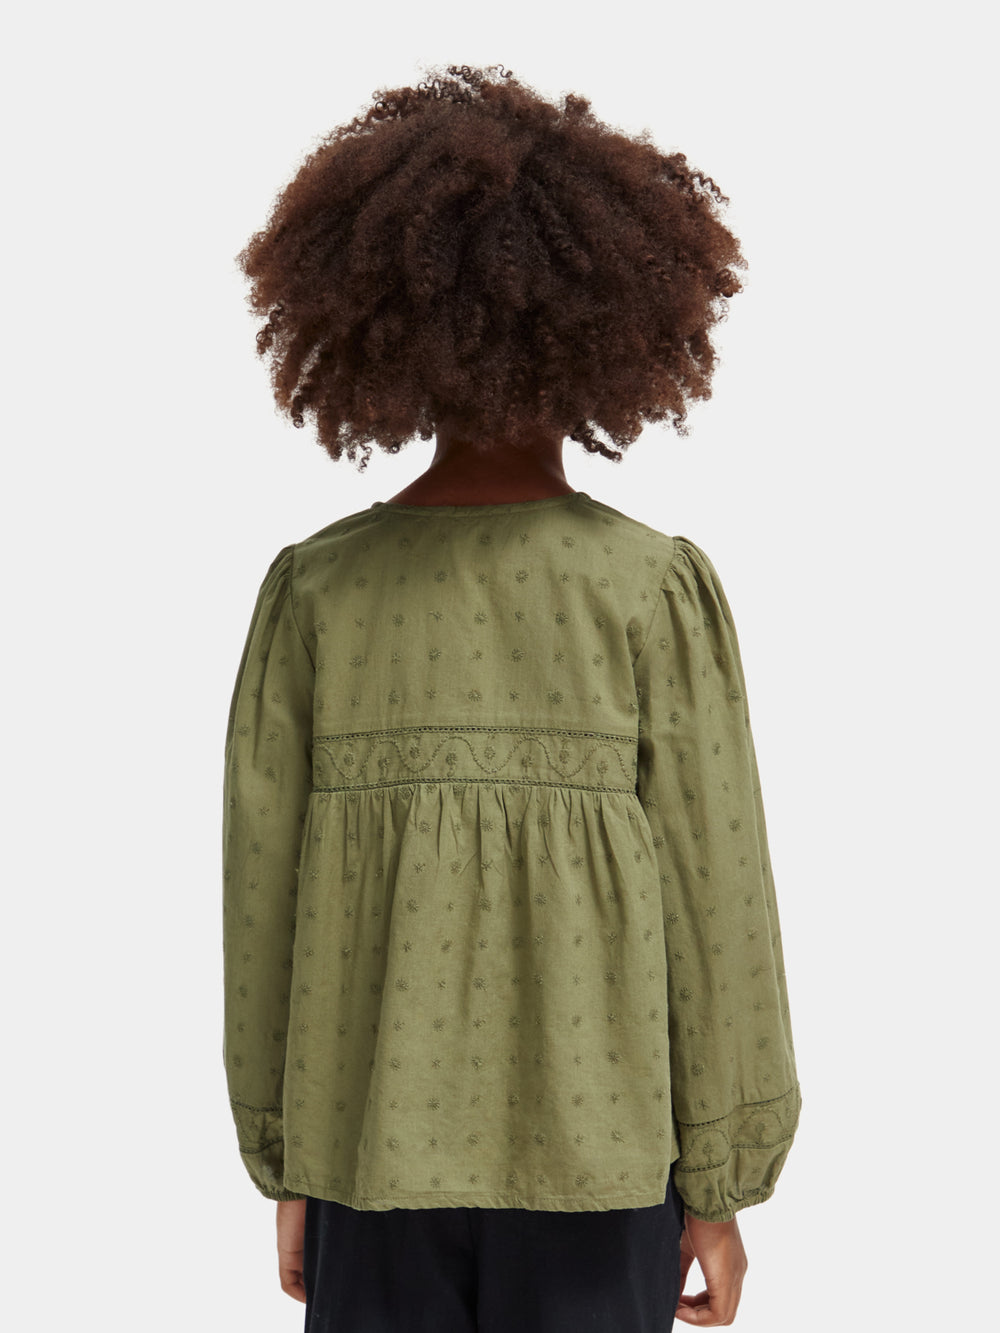 Kids - Broderie anglaise panelled top - Scotch & Soda NZ